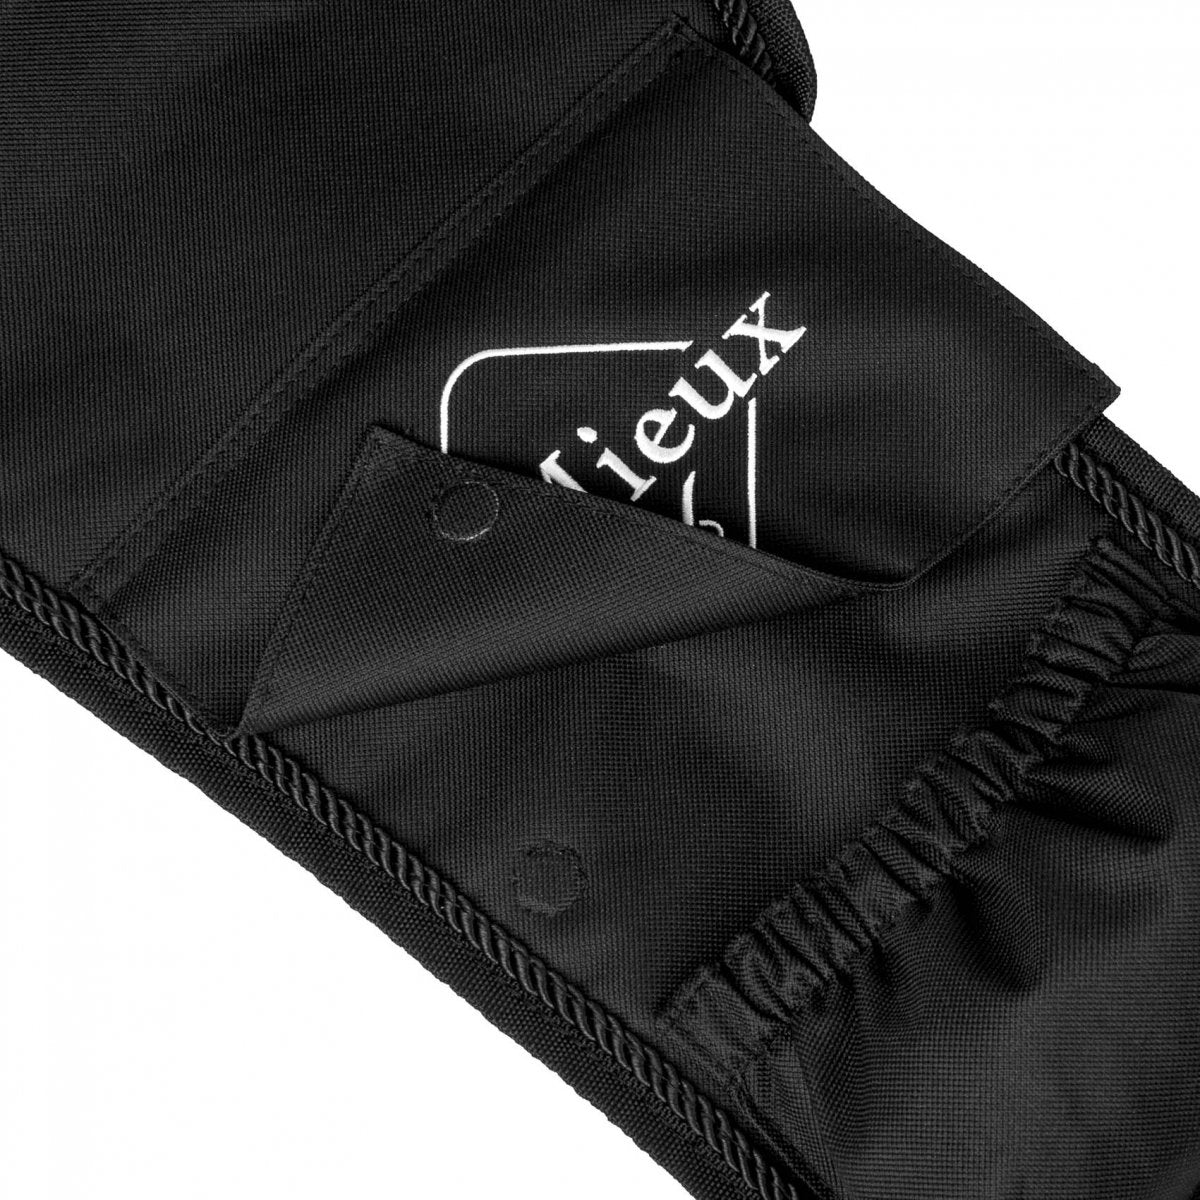 Black stirrup leathers with brand logo on protective fabric cover.